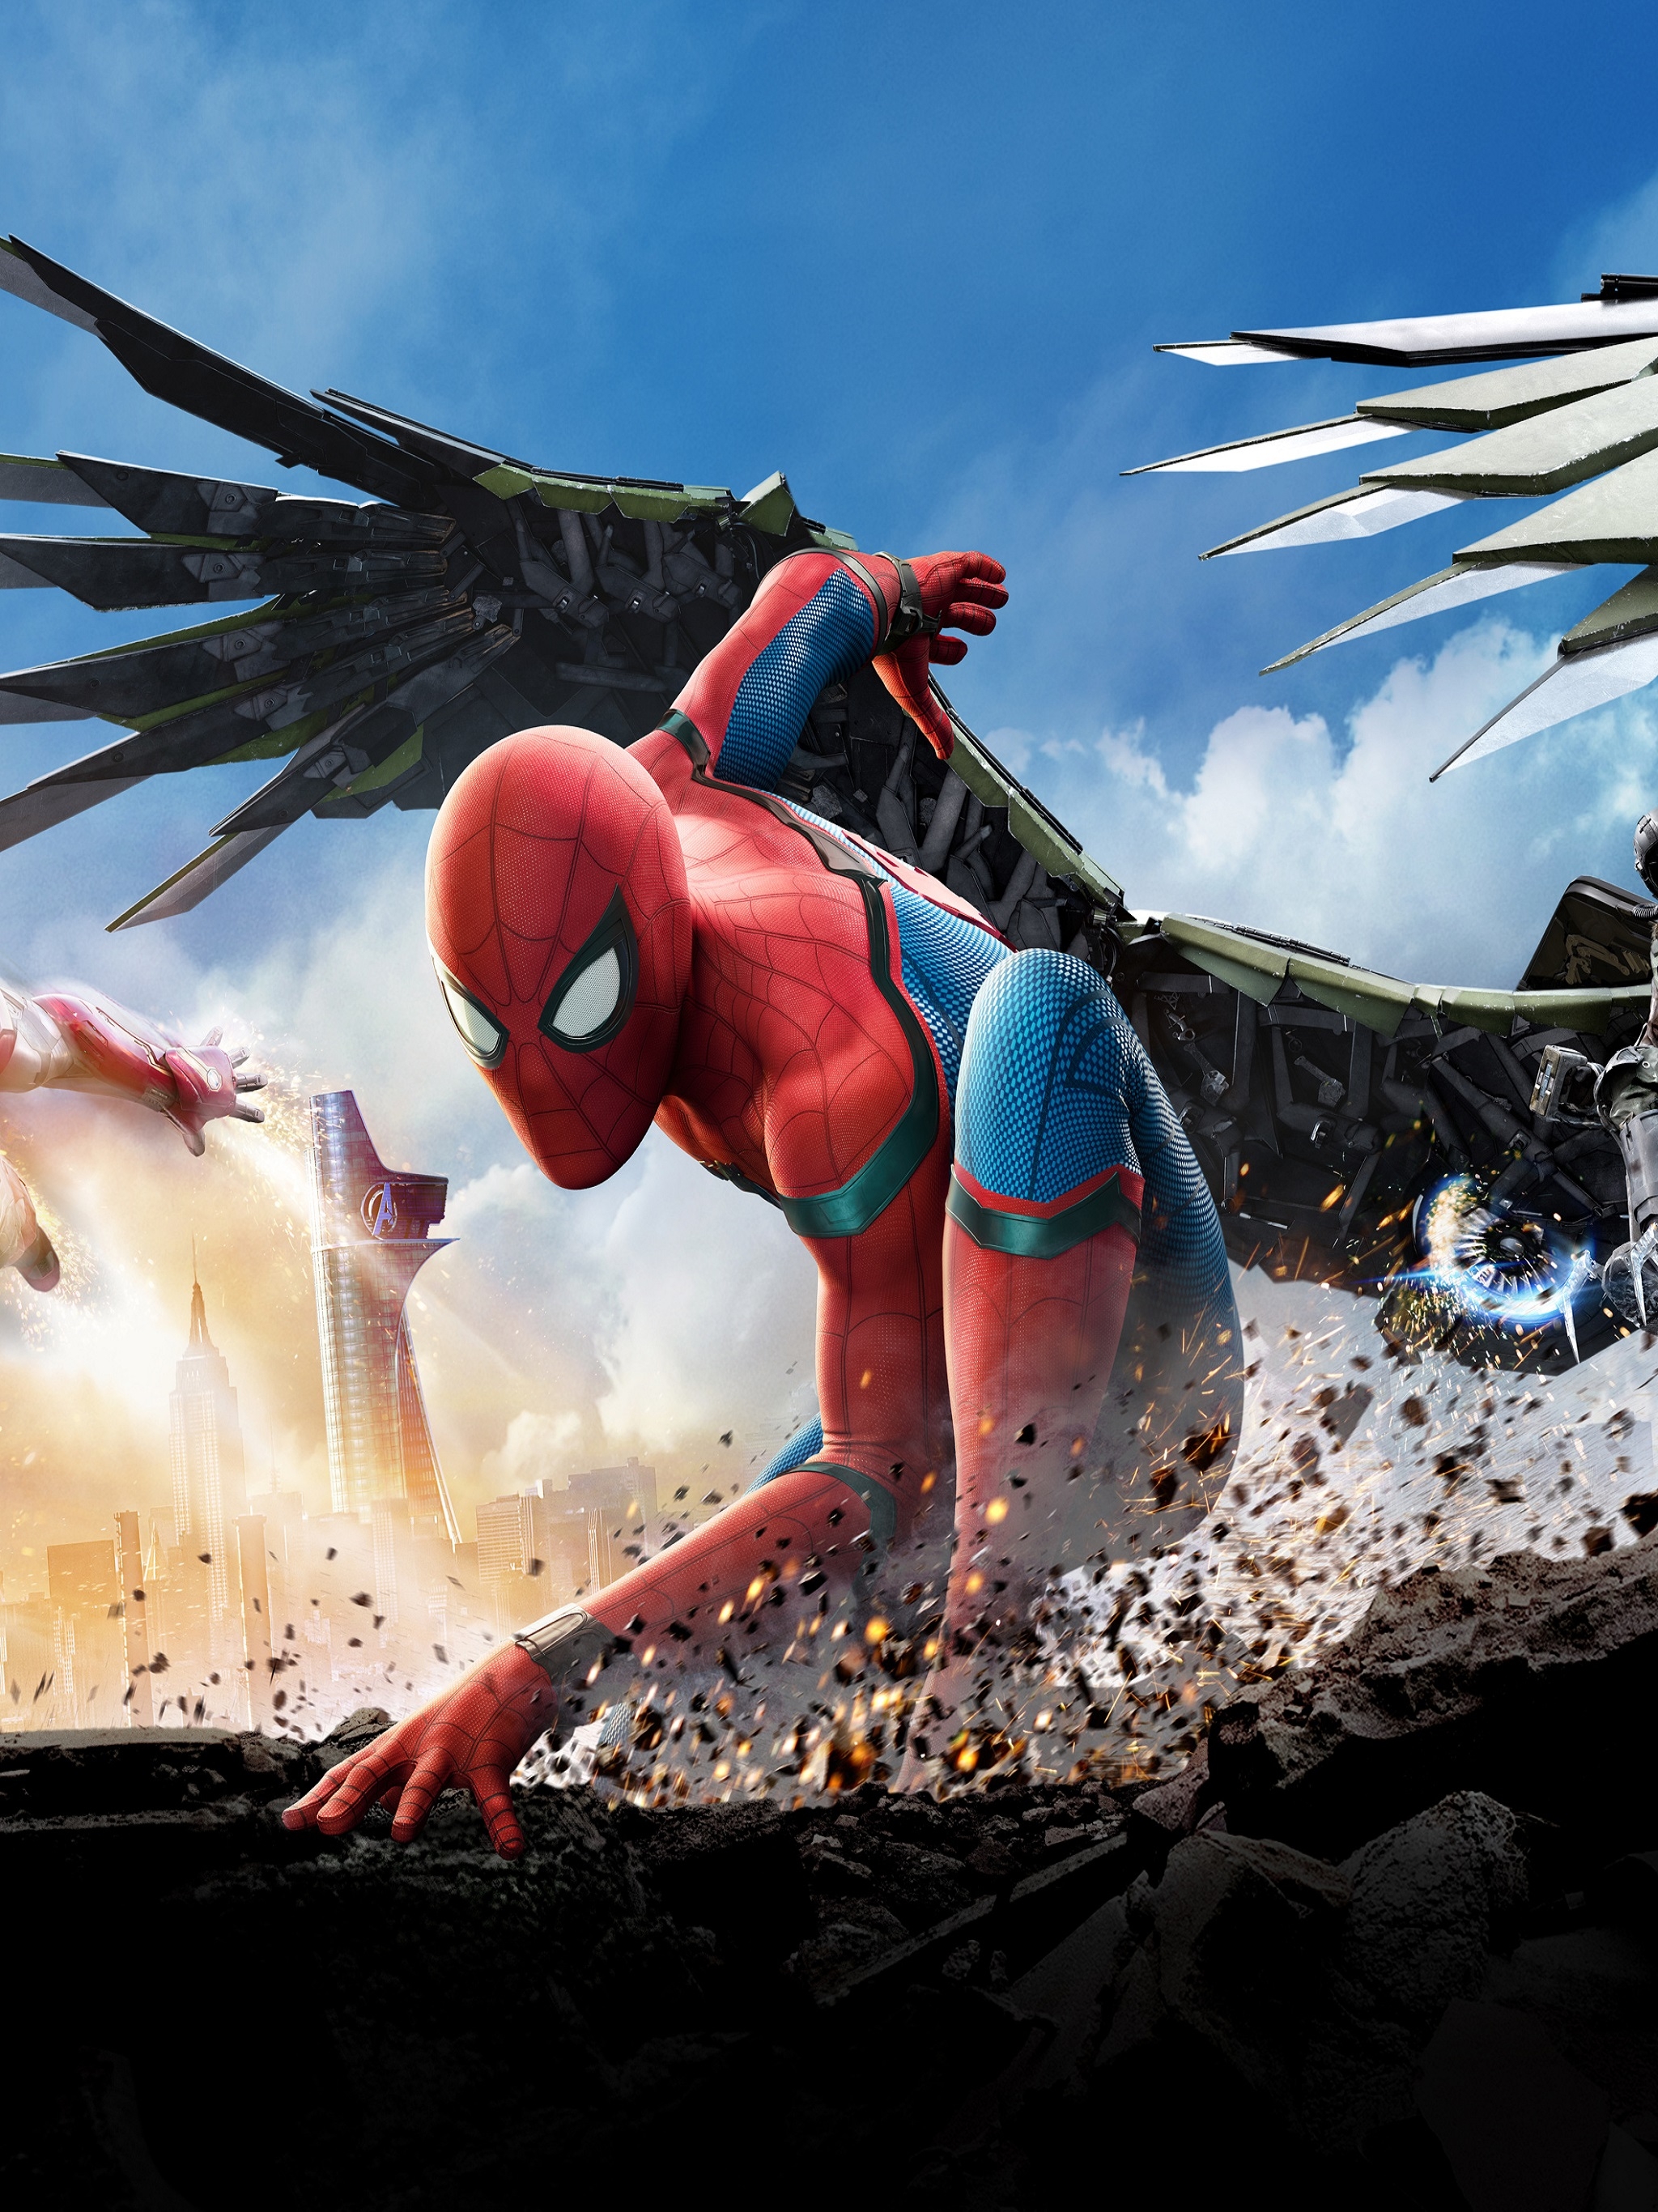 Spiderman Home Coming 2017 for Apple iPad Pro resolution